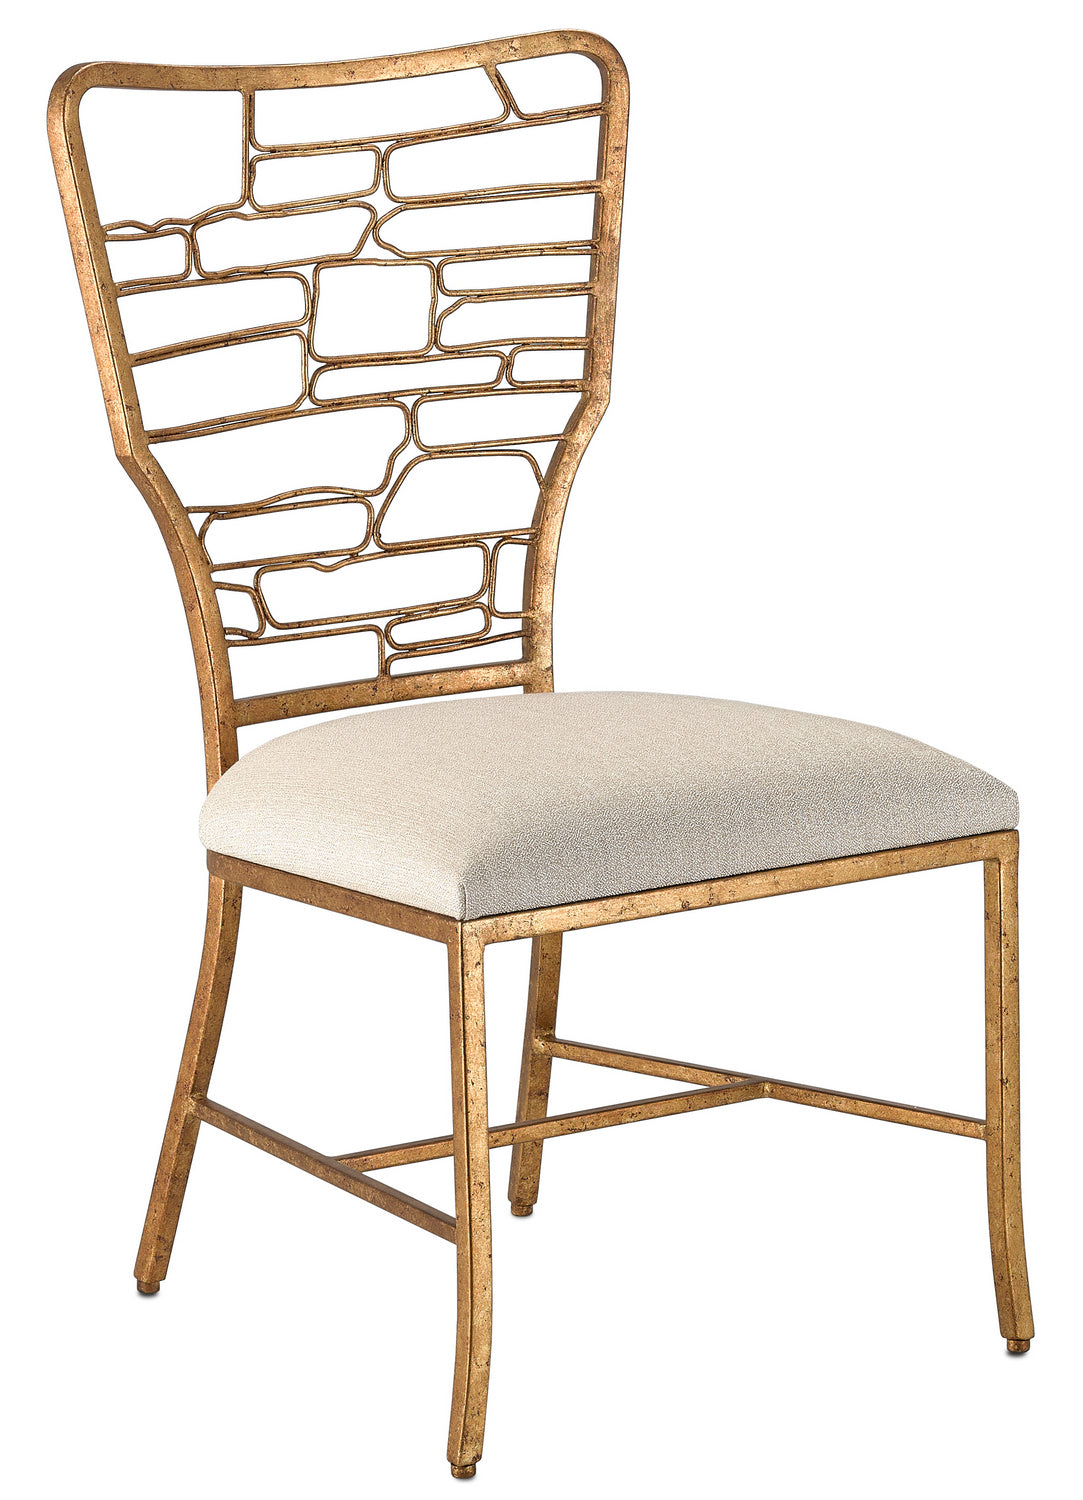 Chair from the Vinton collection in Gilt Bronze finish